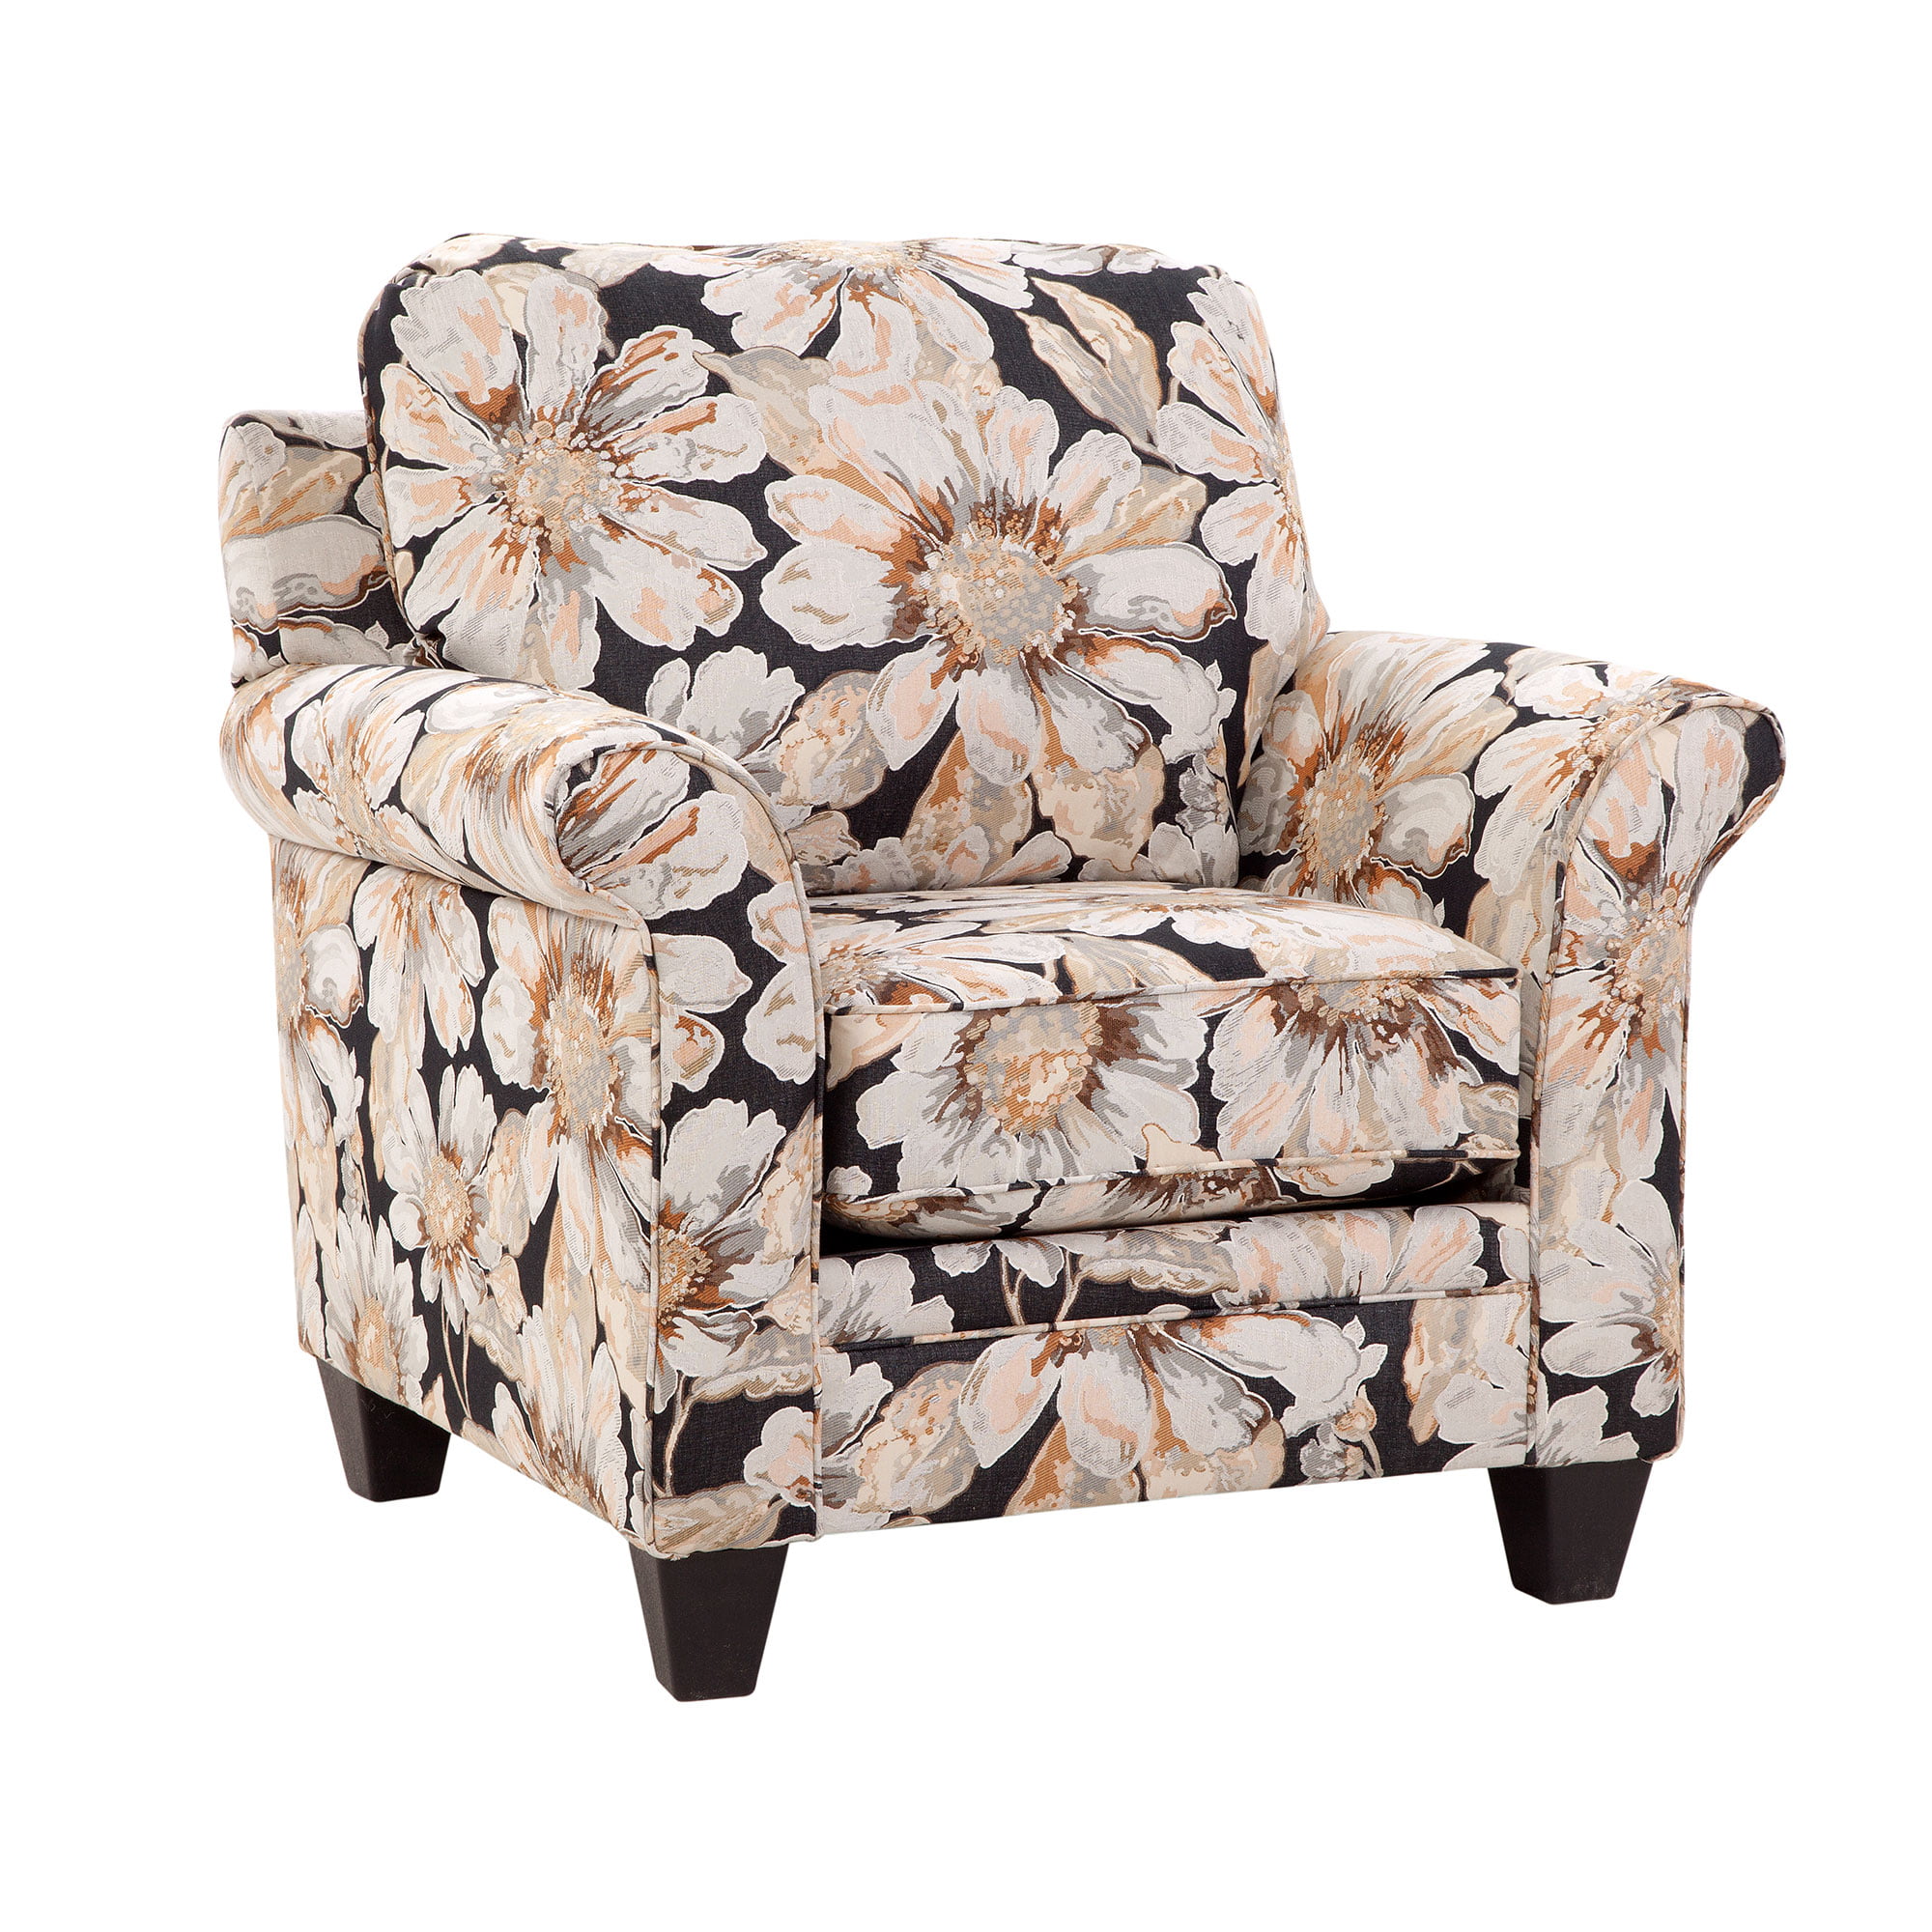 Cosmos Accent Chair, elegant traditional roll arm chair